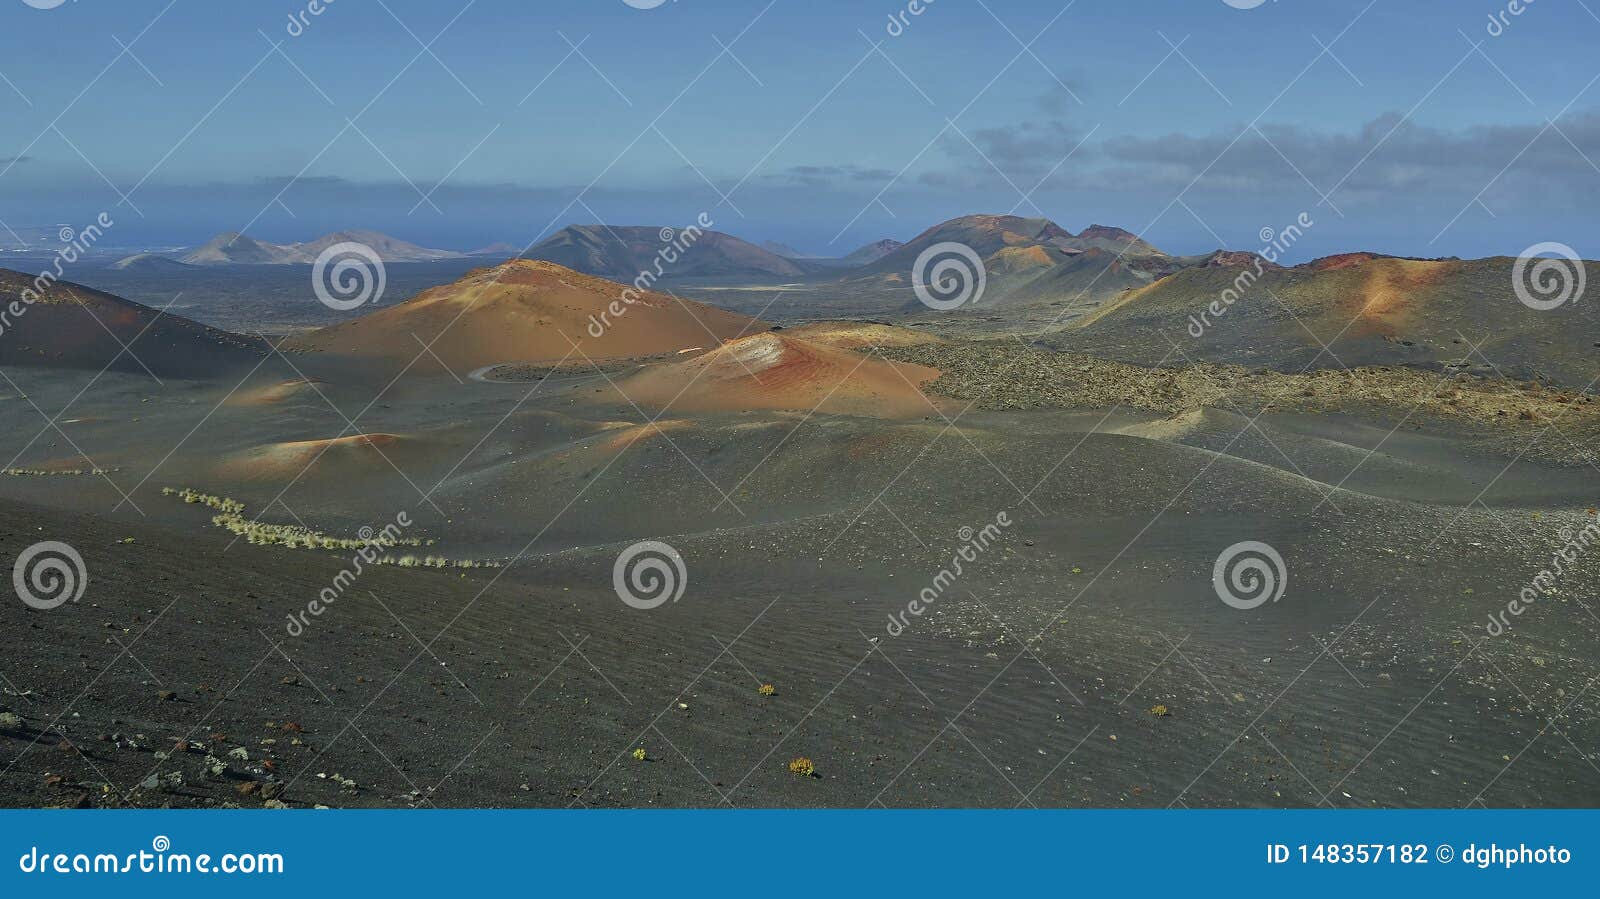 scenic landscape ovolcanic landscape at timanfaya national park on lanzarote islandn the island of lanzarote in the atlantic ocean